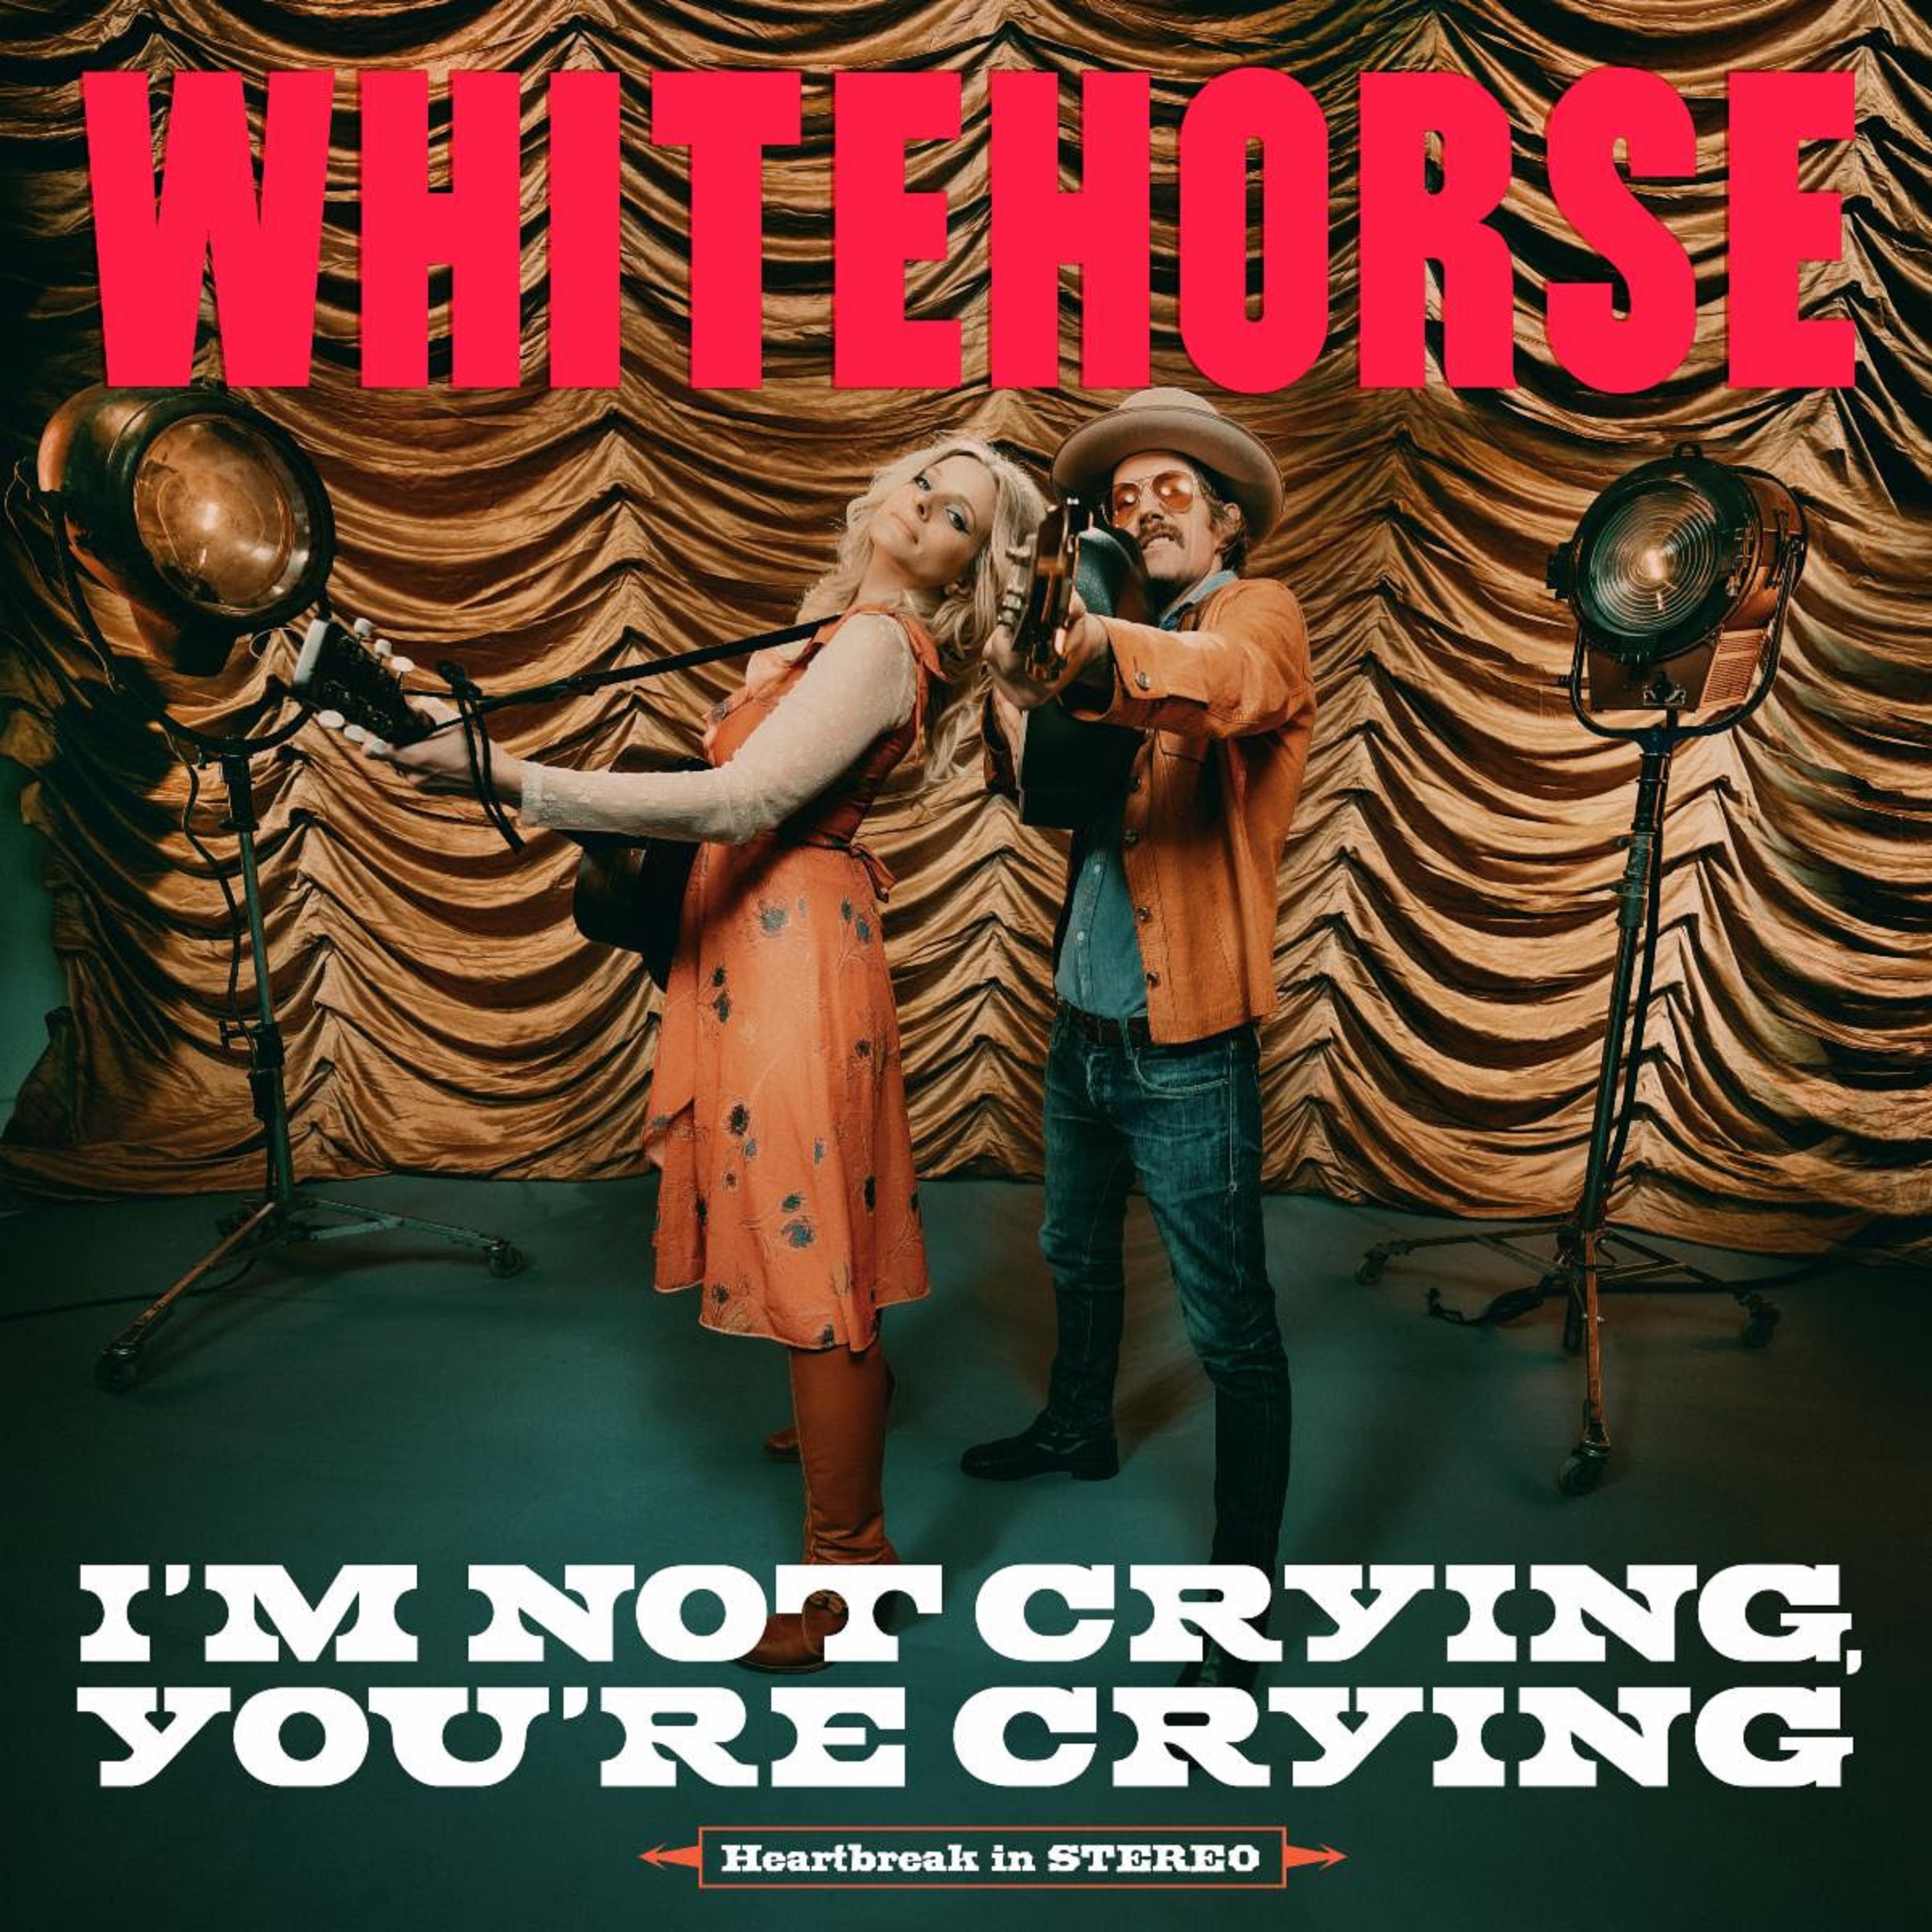 Acclaimed Canadian Duo Whitehorse Put An Upbeat, Country Twist On The Lockdown Song With “If The Loneliness Don’t Kill Me”